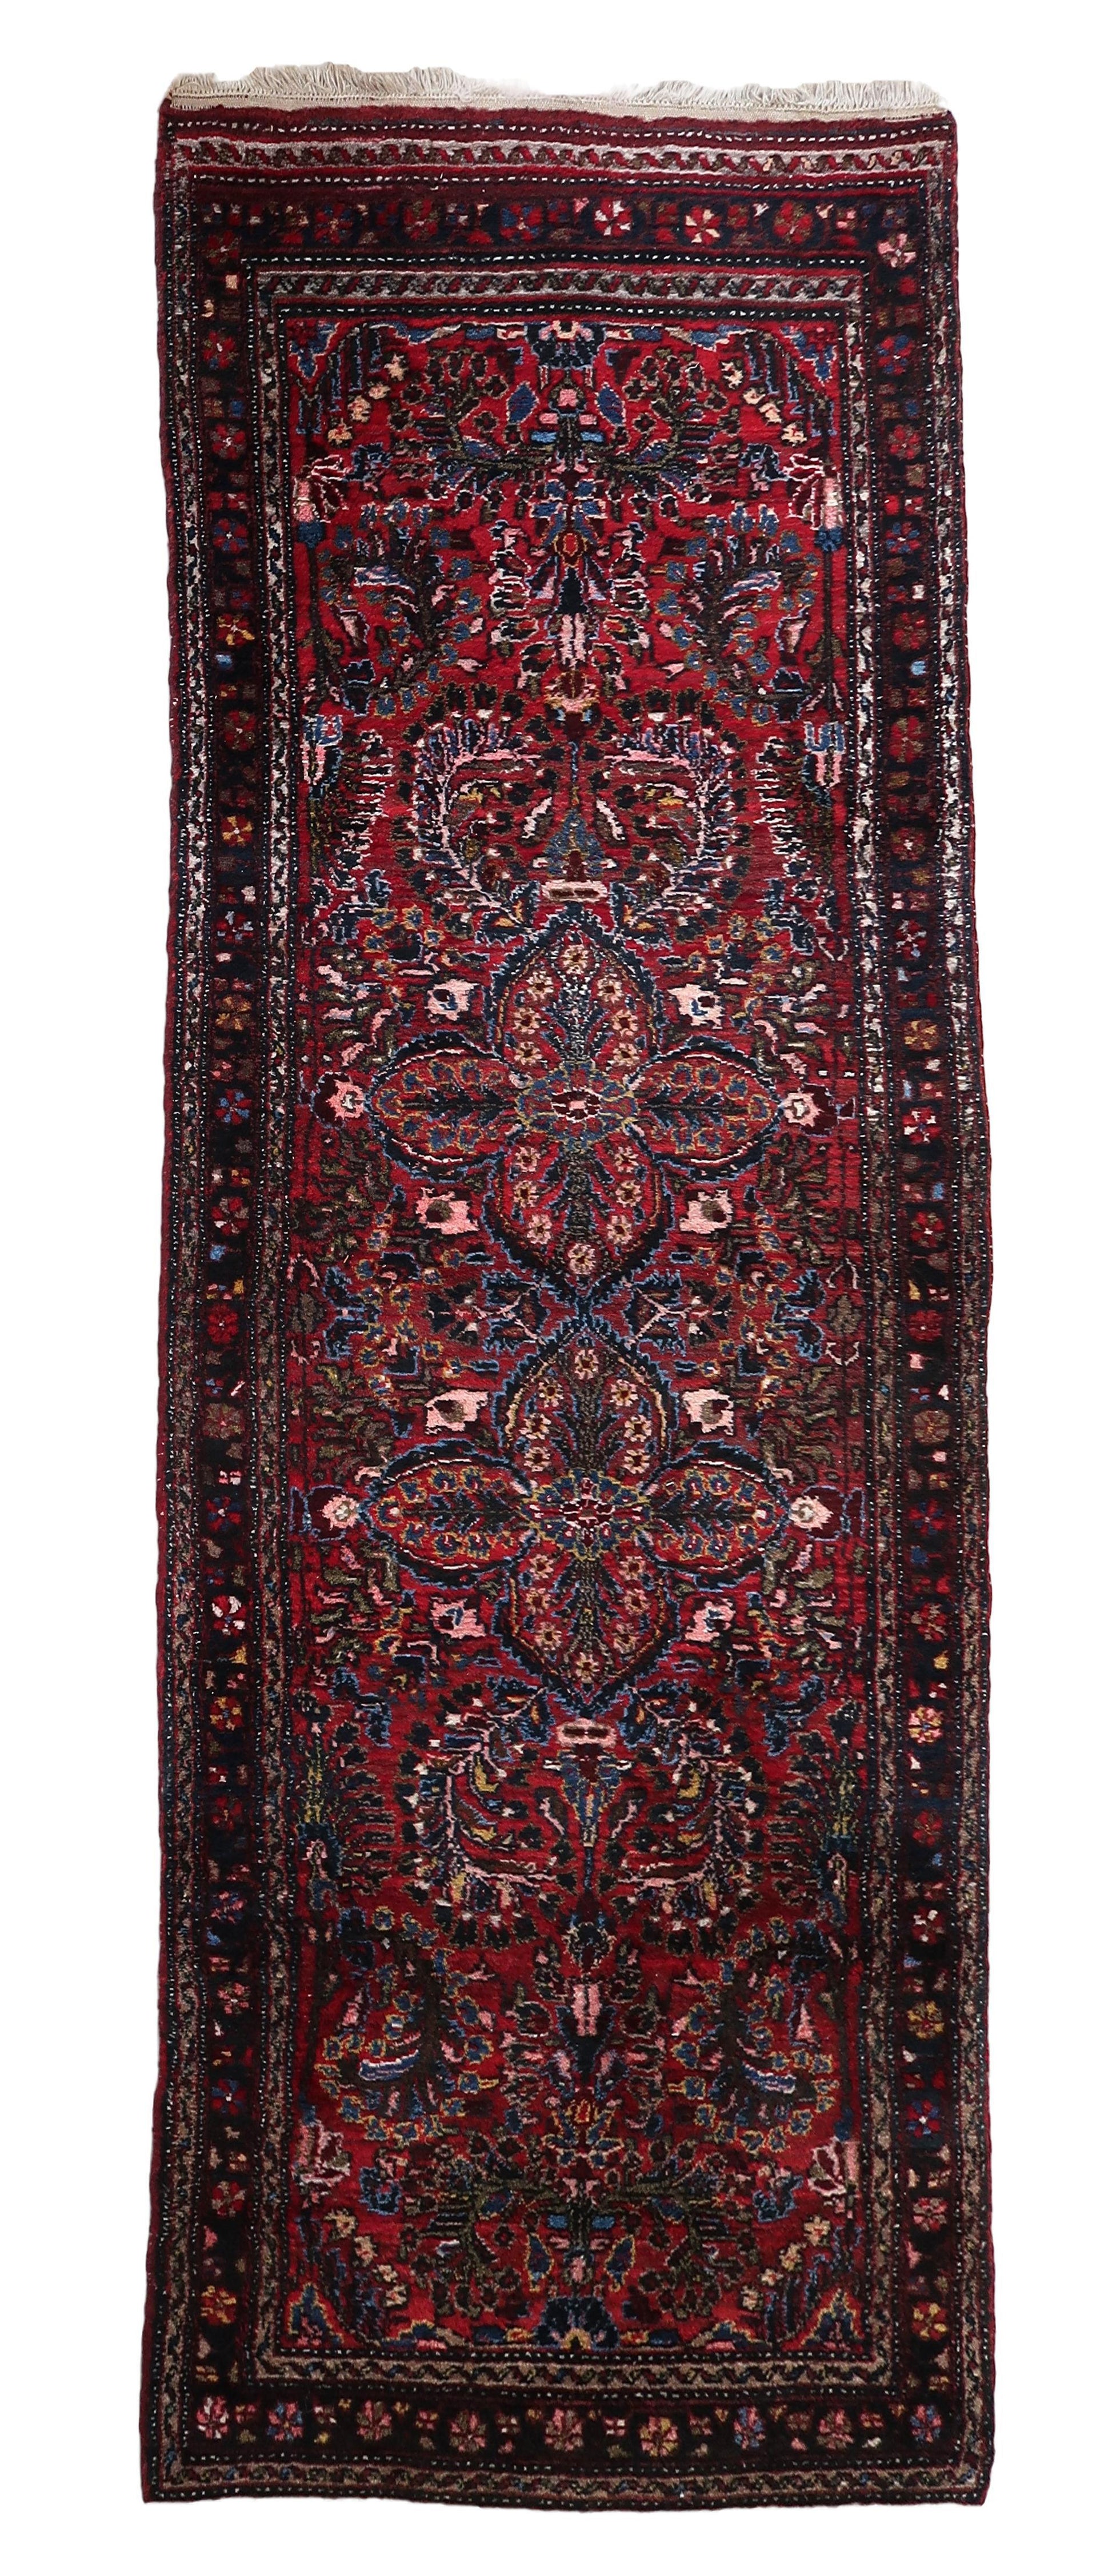 Handmade Vintage Persian Style Sarouk Runner Rug from the 1930s in original good condition.